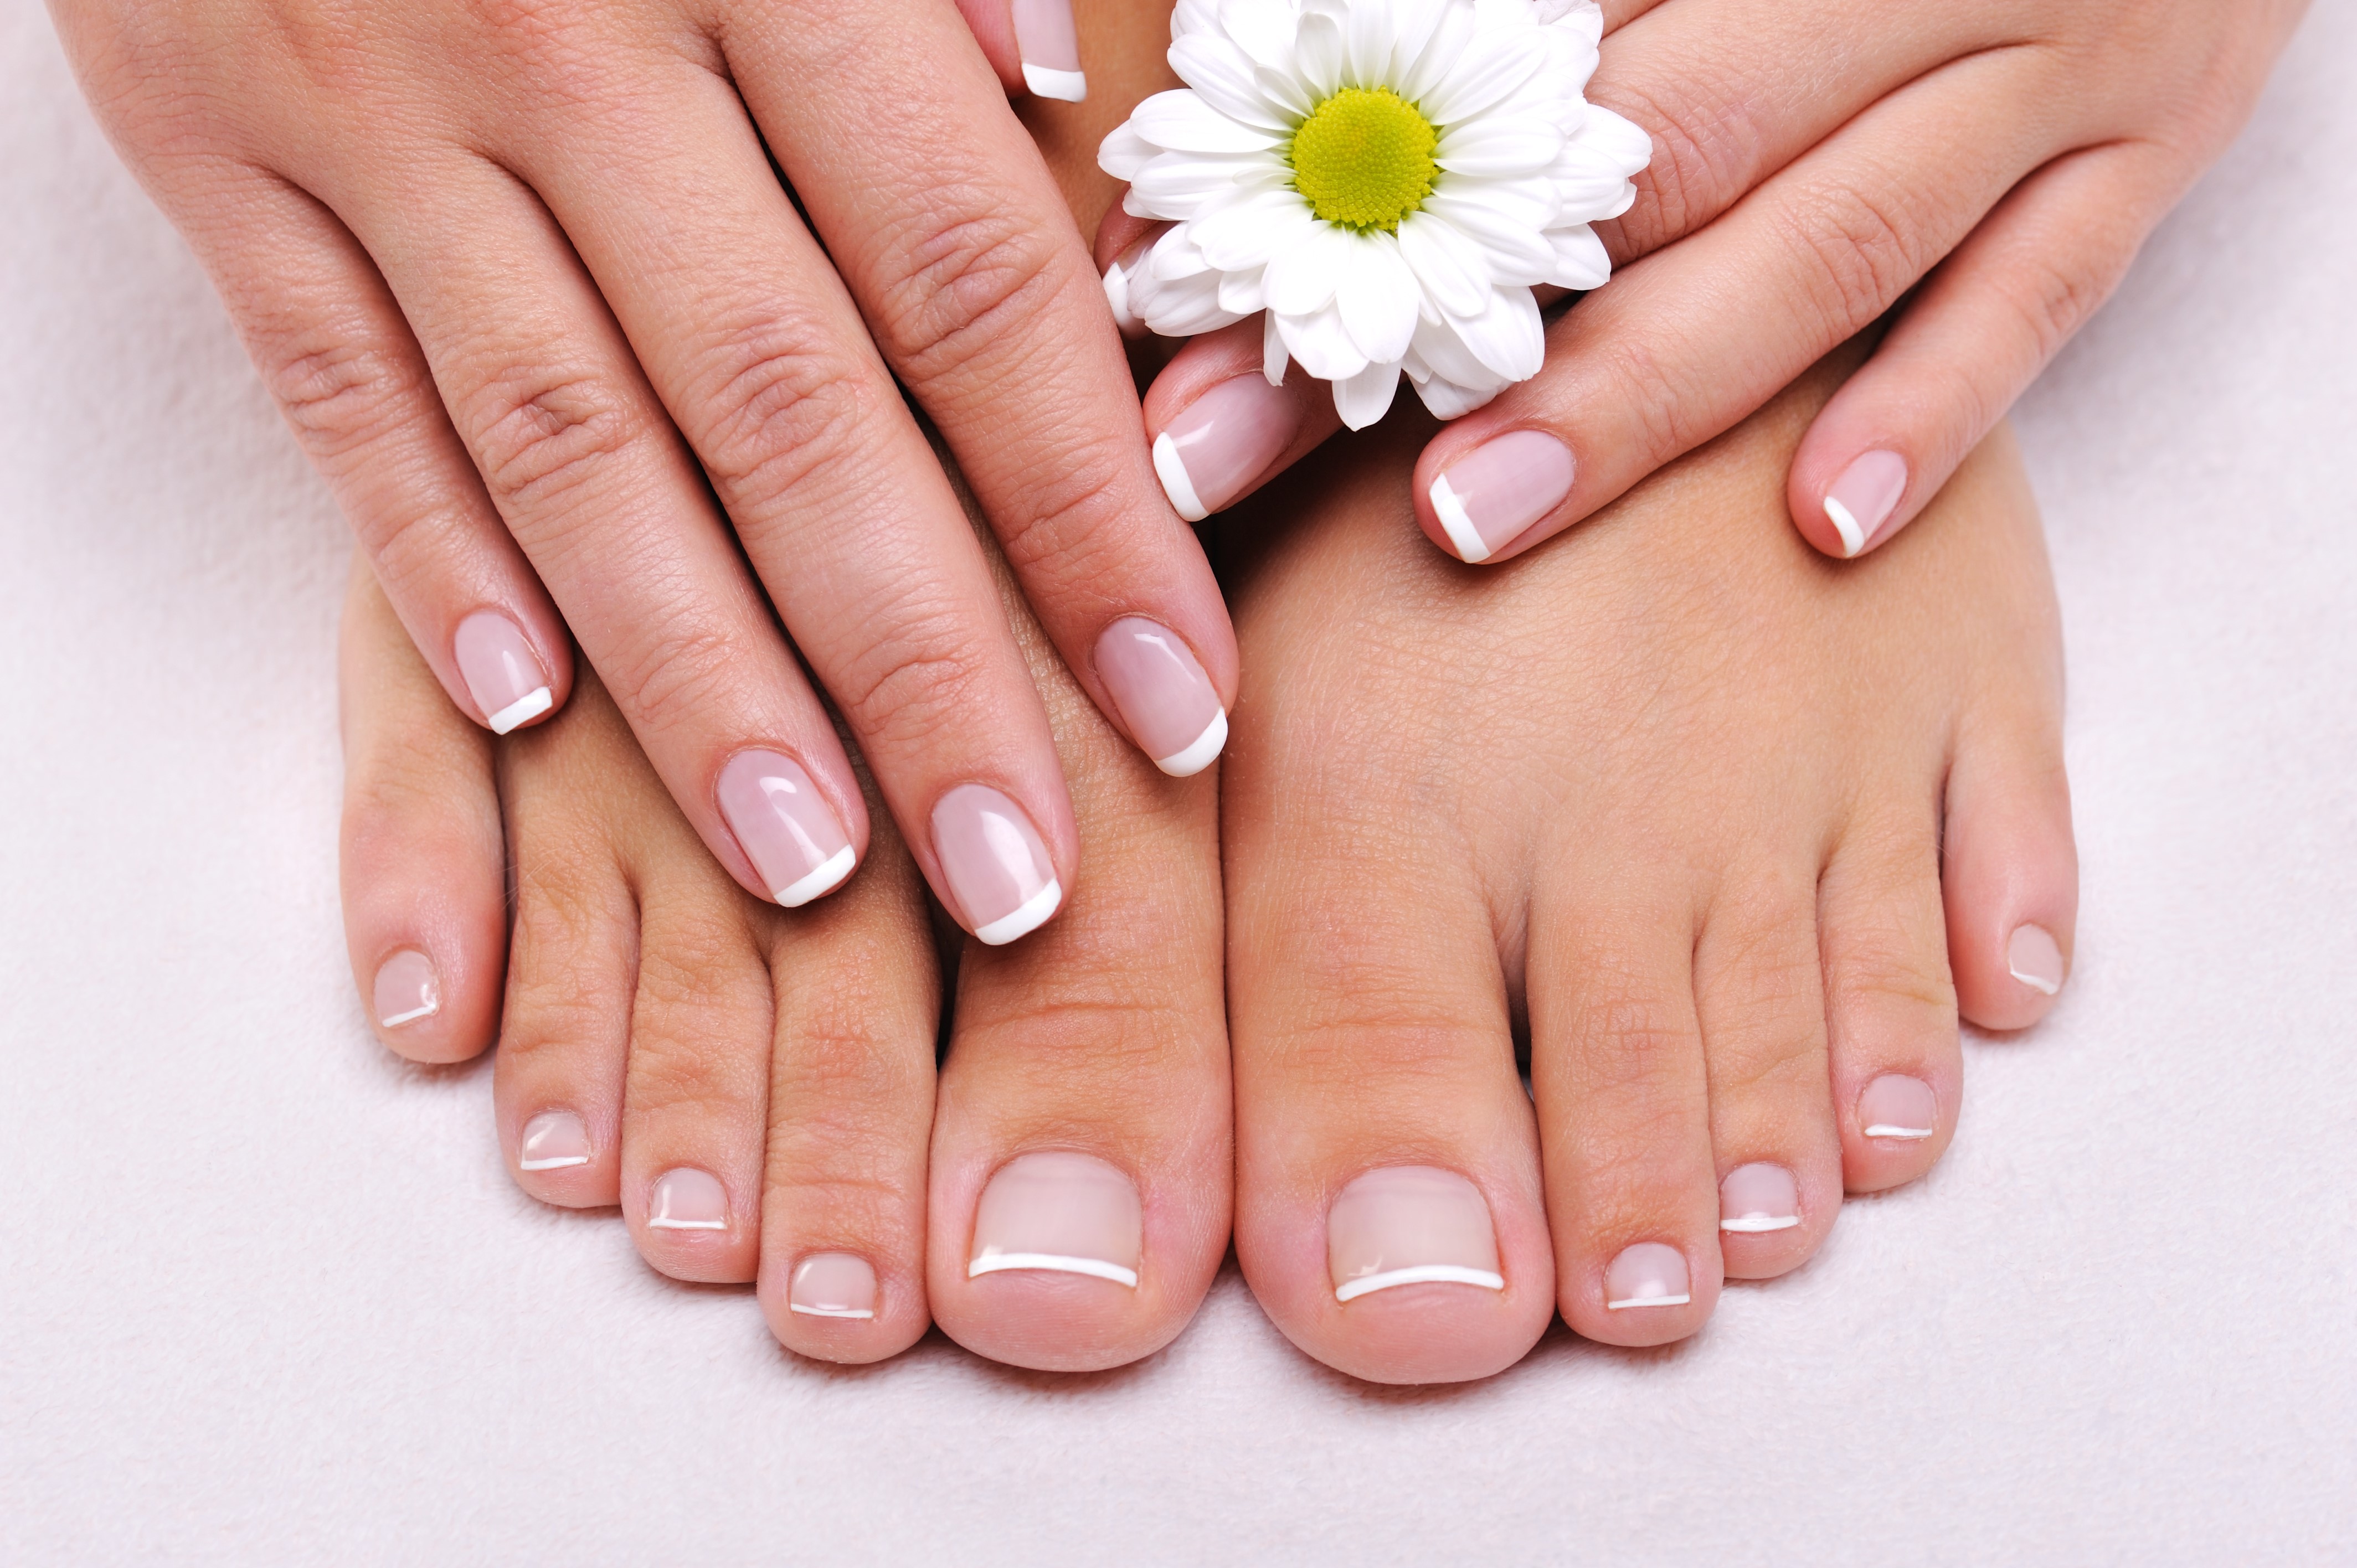 Foods You Should Be Eating If You Want Stronger Nails